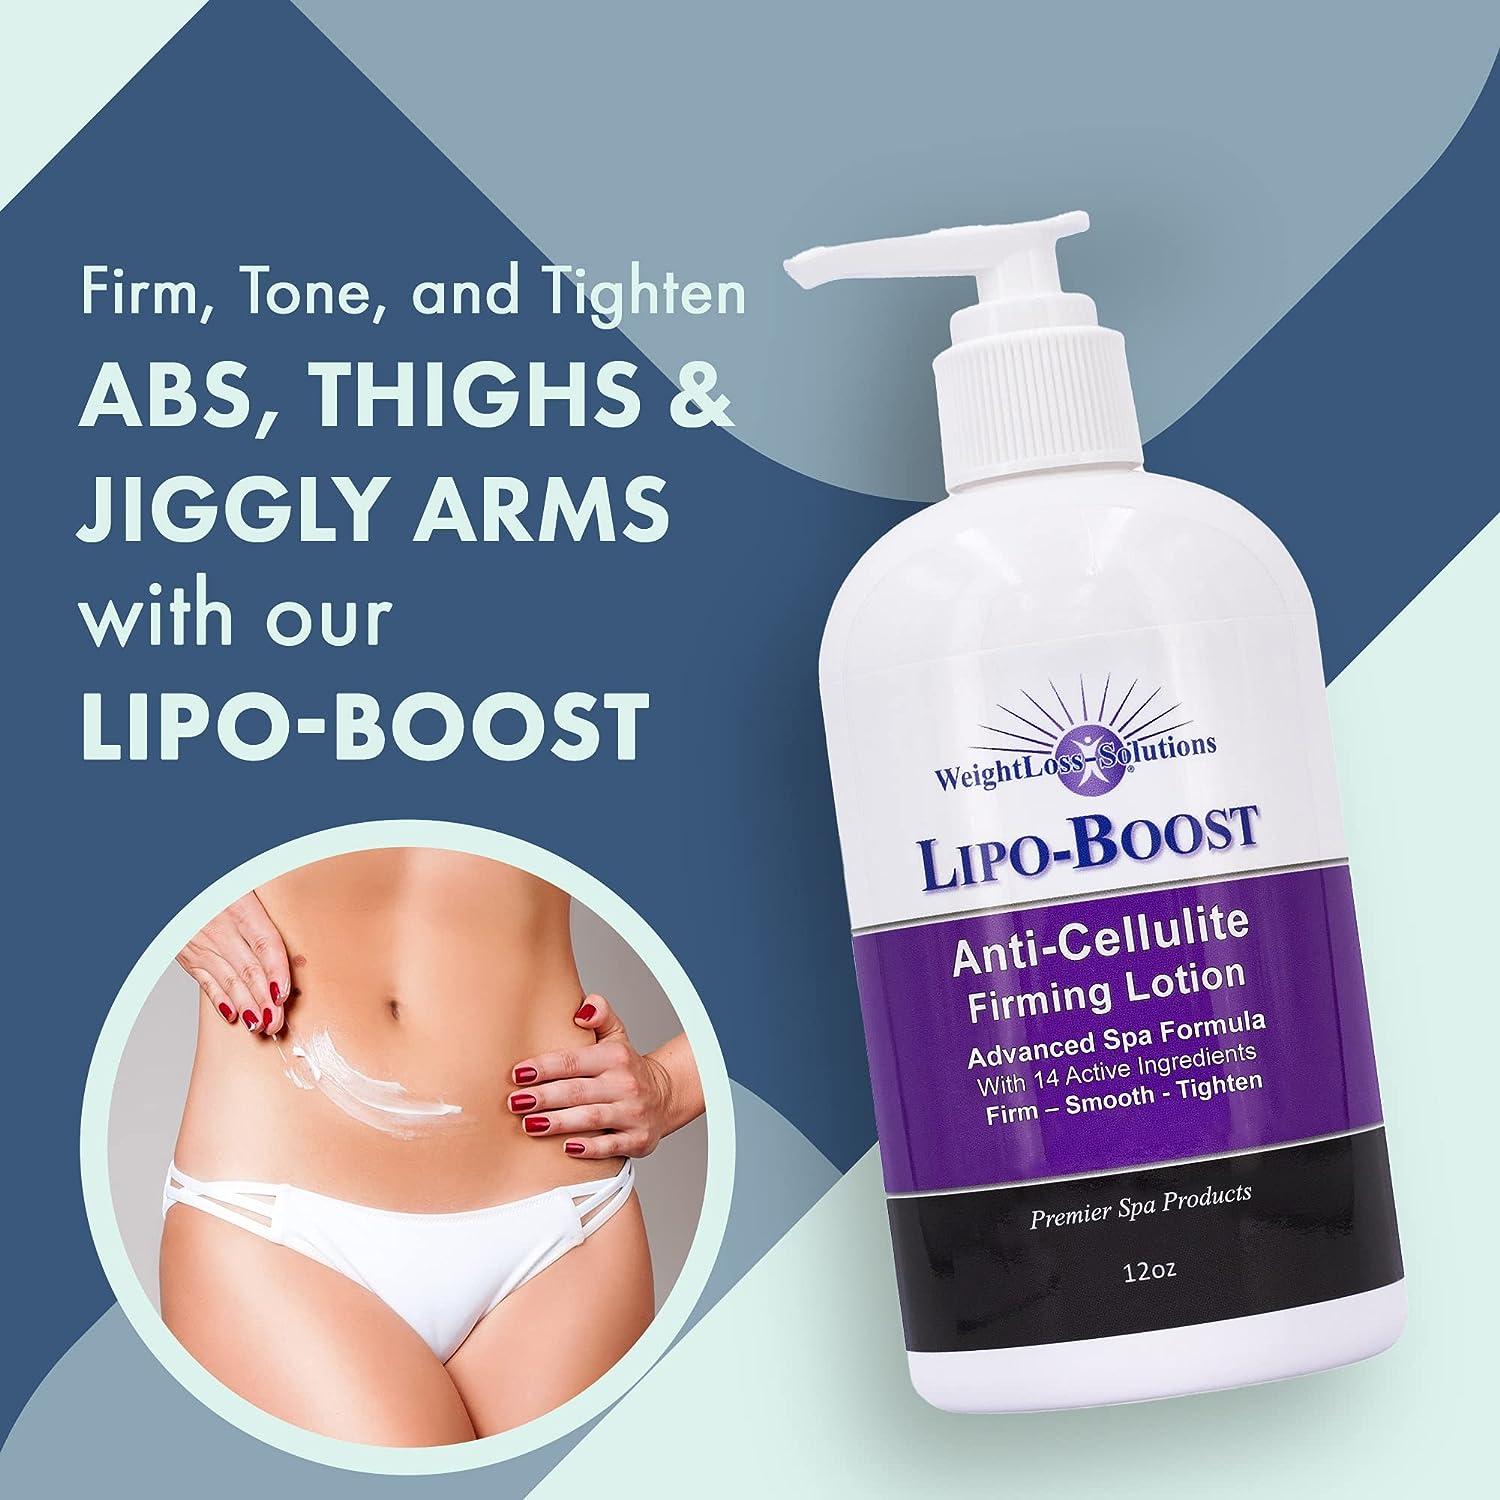 WeightLoss-Solutions Lipo-Boost Cellulite Cream with Caffeine is